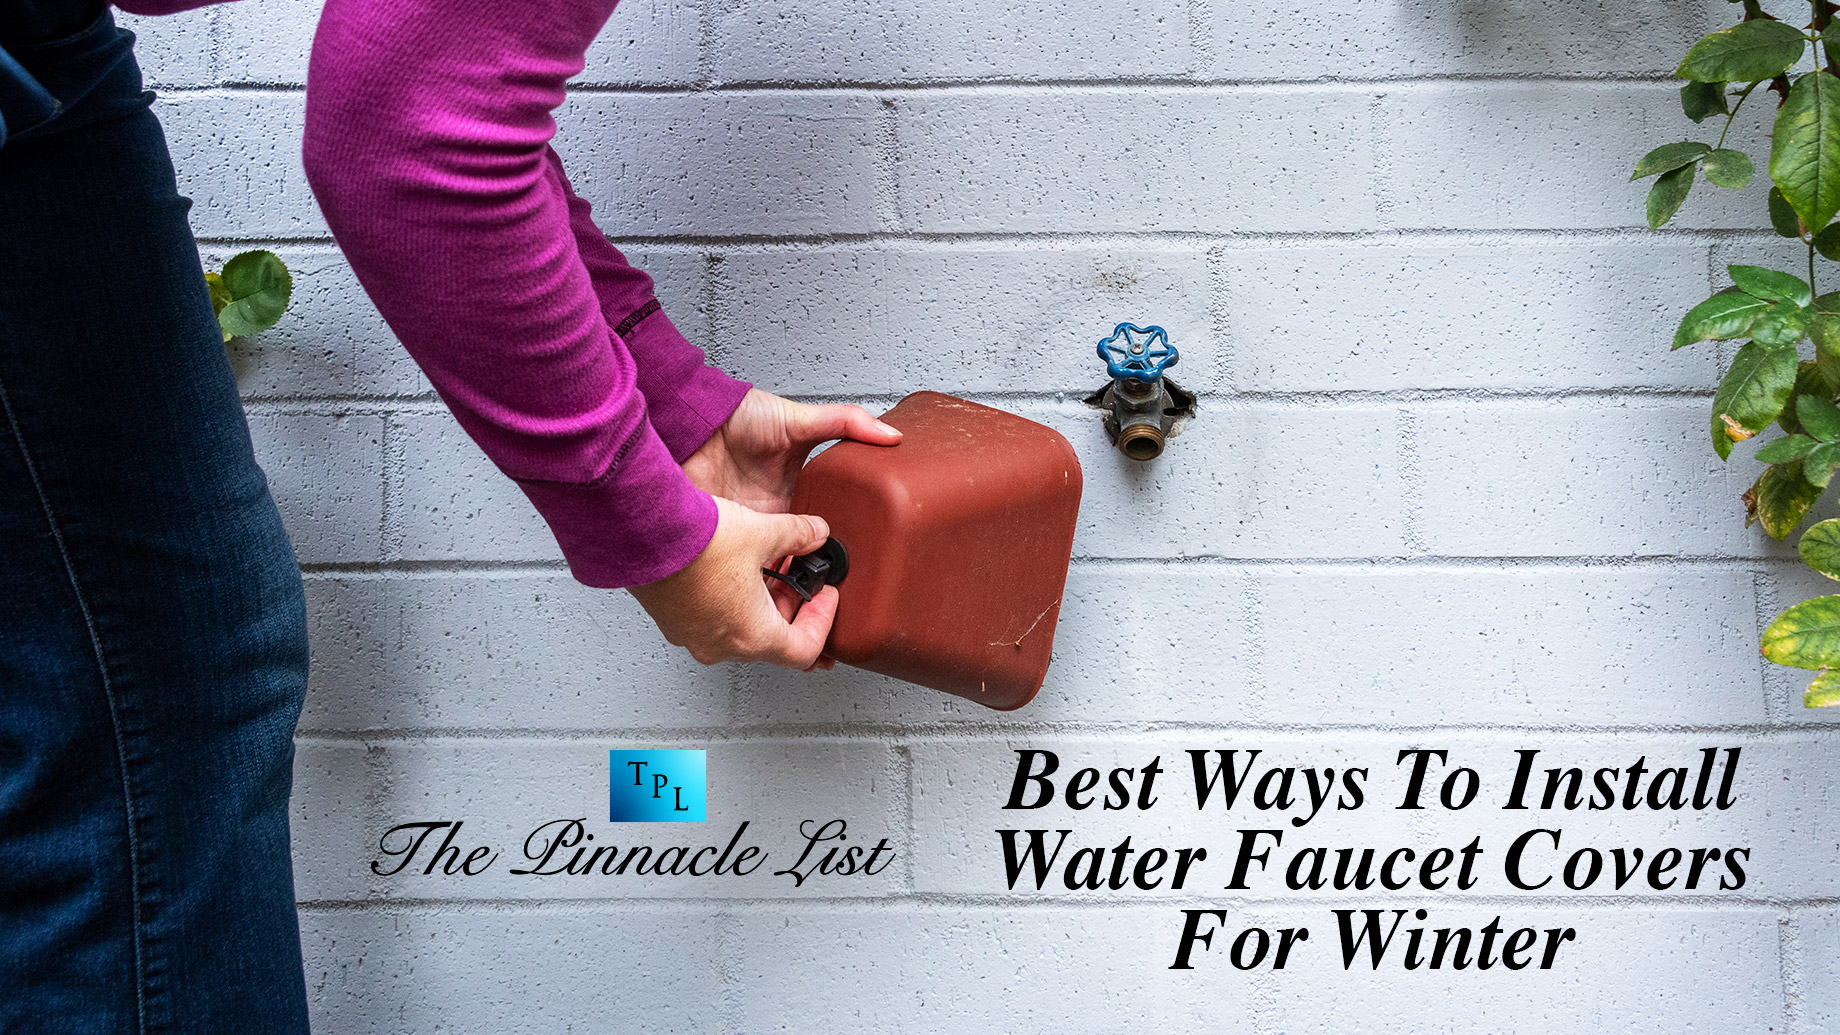 Best Ways To Install Water Faucet Covers For Winter